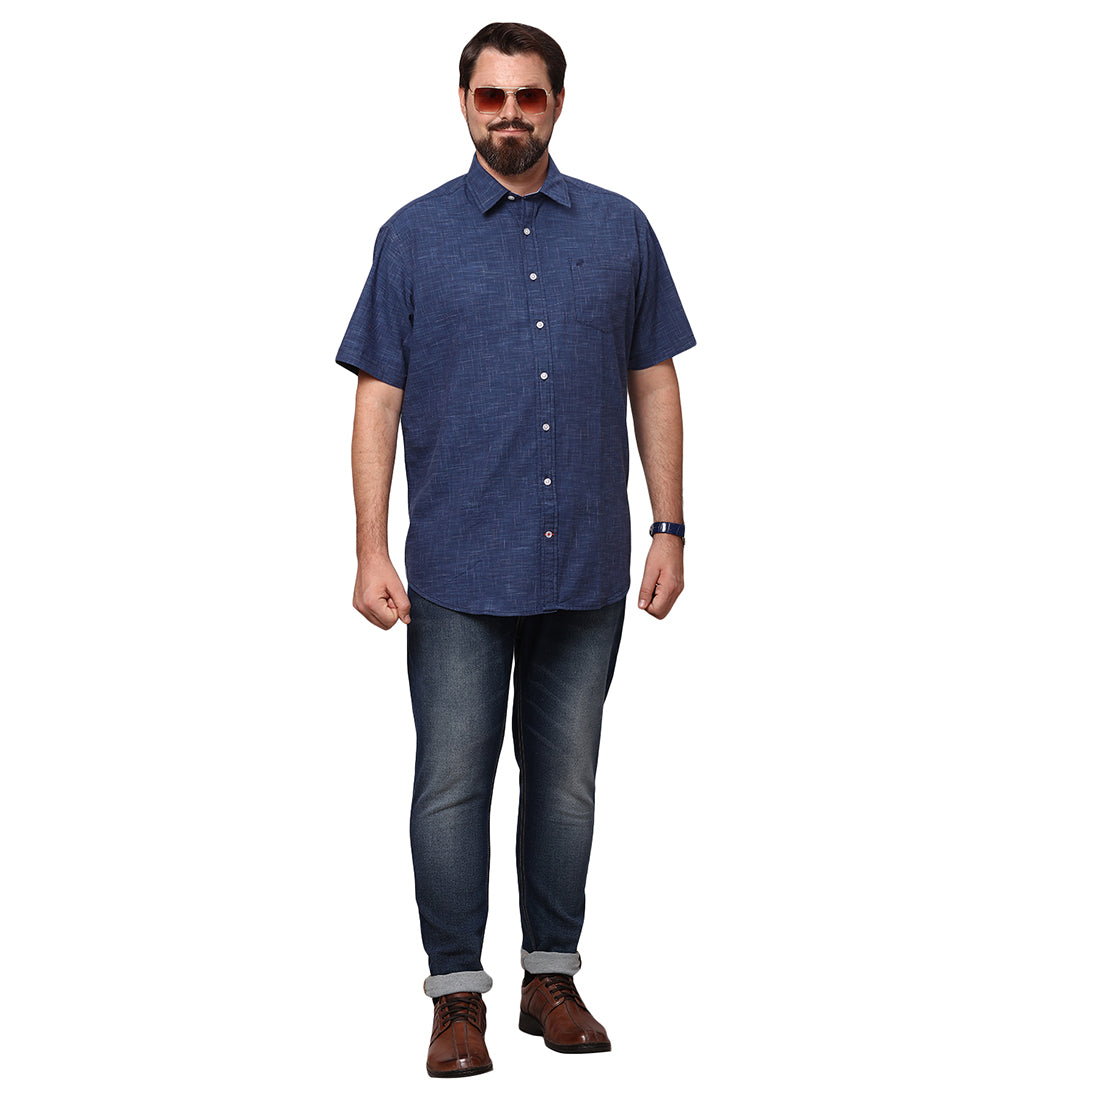 Big & Bold Solid Navy Blue Half Sleeves Slim Fit Casual Shirts (Plus Size) - Double Two